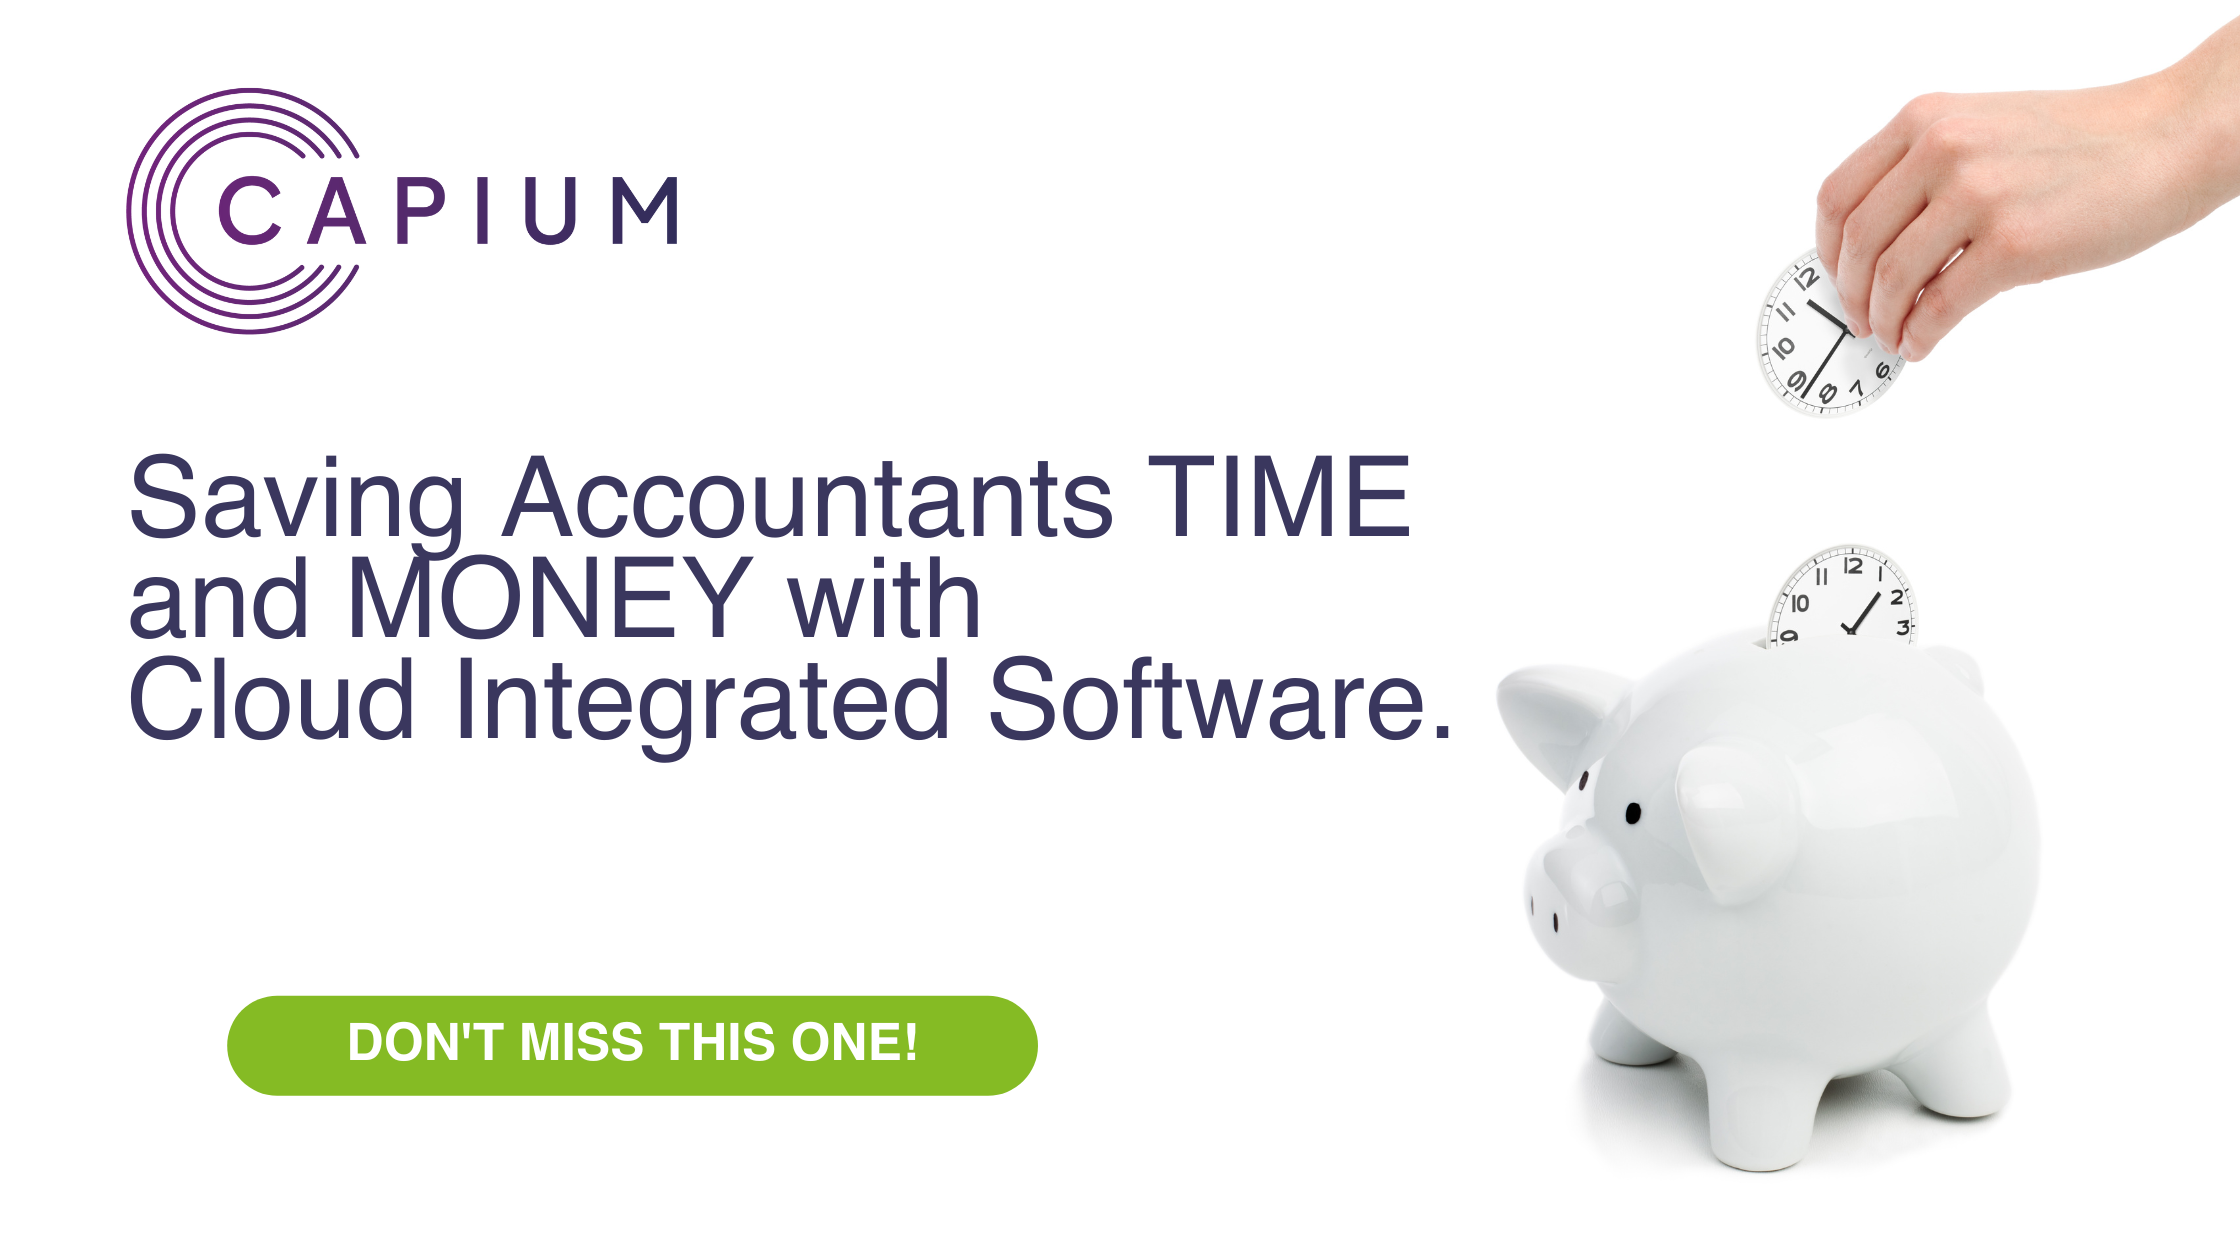 Learn how to save money and time with Capium image